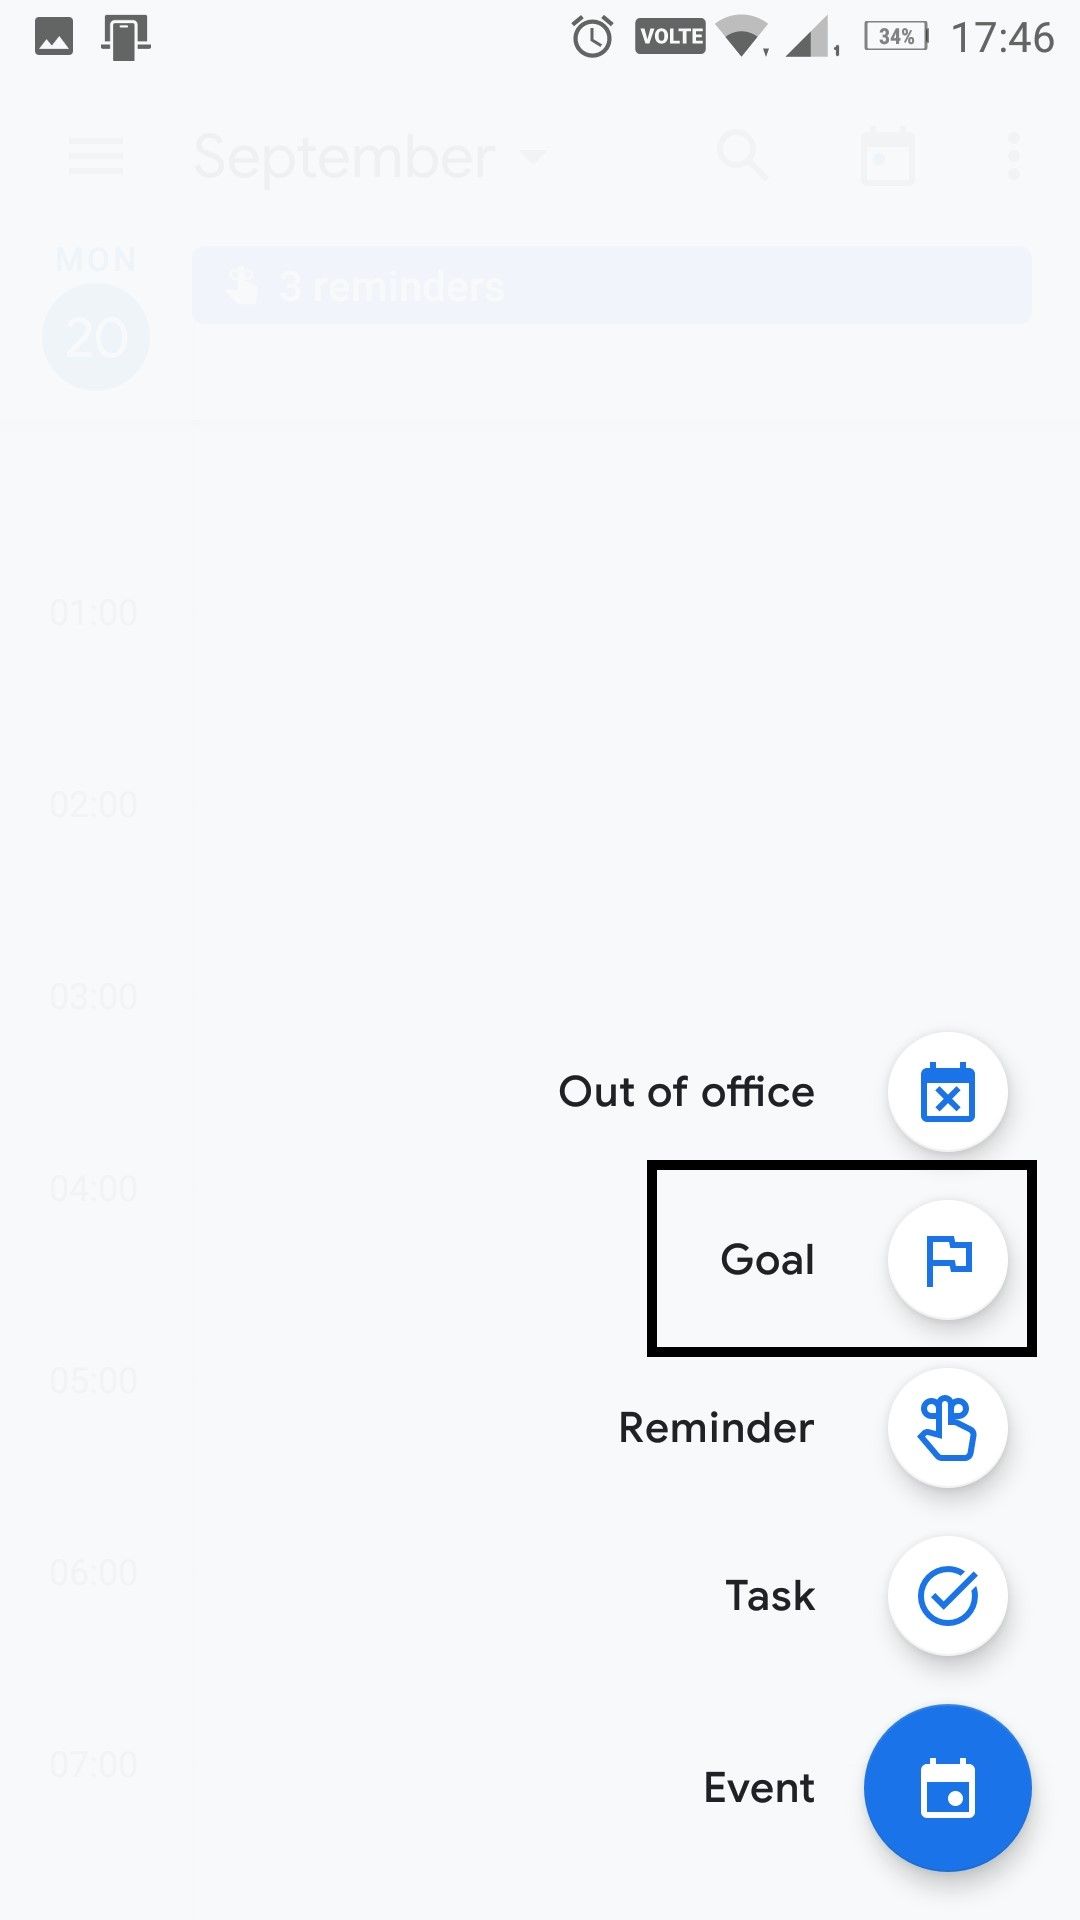 How to Create and Edit Goals in Google Calendar